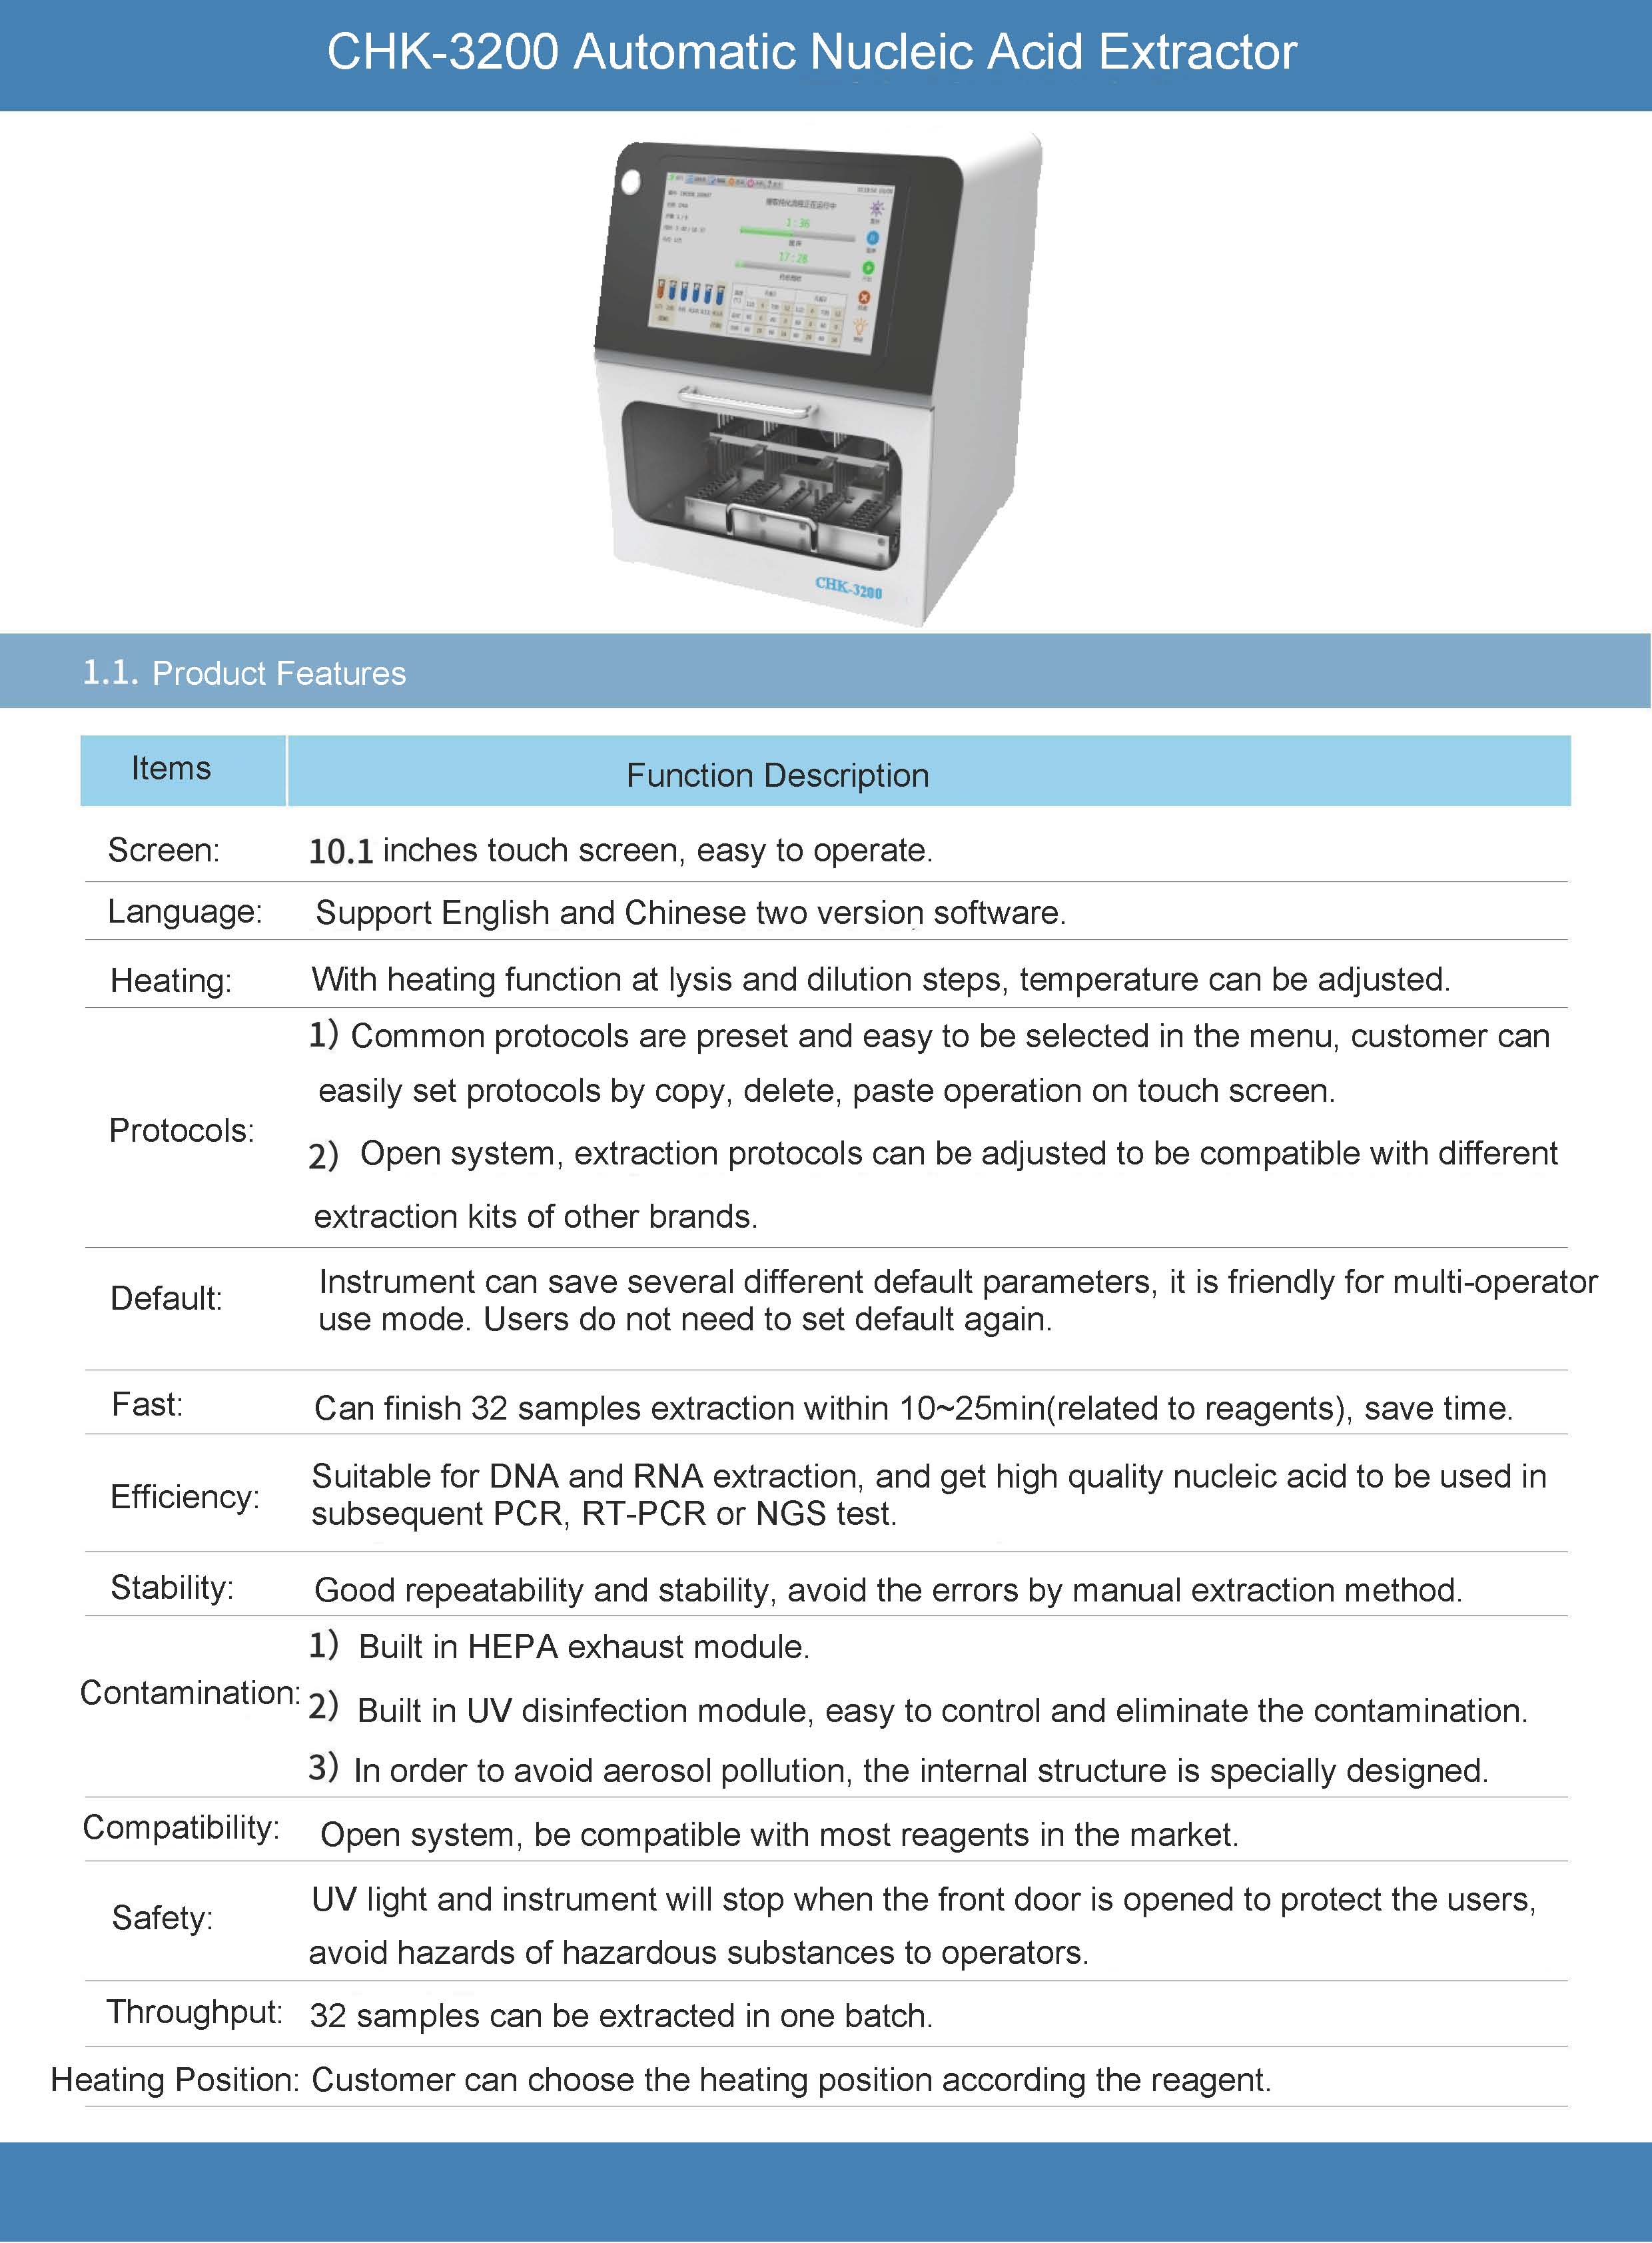 I-CHK-3200 i-Nucleic Acid Extractor-Flyer_页面_1